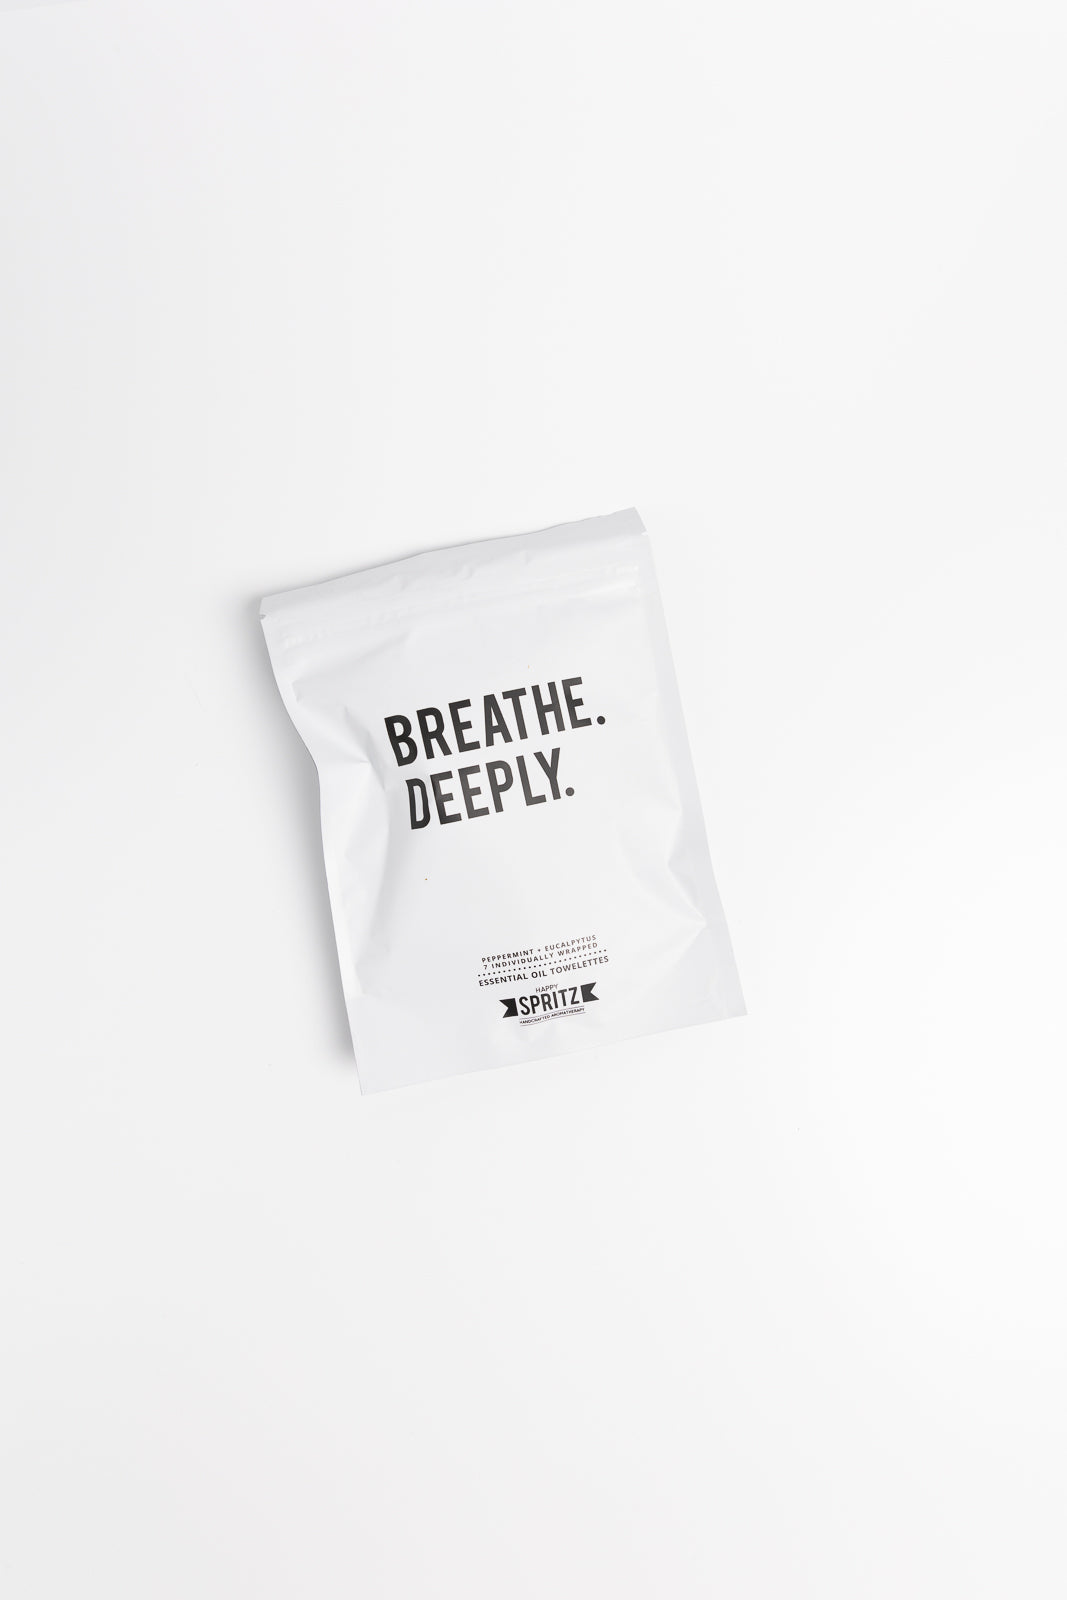 'Breathe Deeply' Essential Oil Towelettes - 7 day bag